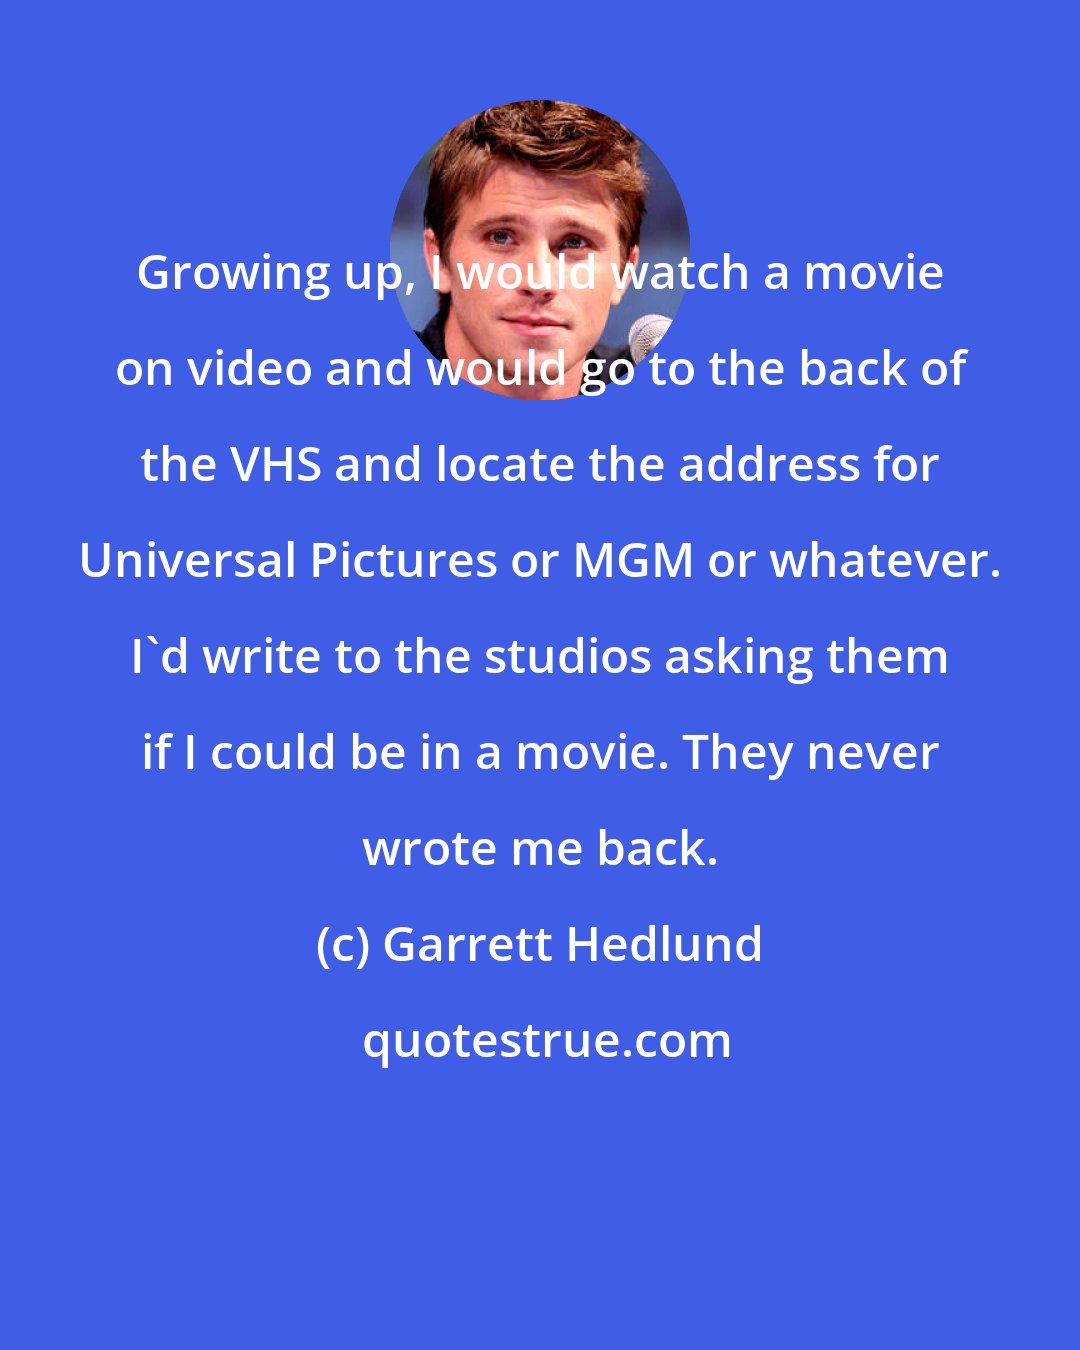 Garrett Hedlund: Growing up, I would watch a movie on video and would go to the back of the VHS and locate the address for Universal Pictures or MGM or whatever. I'd write to the studios asking them if I could be in a movie. They never wrote me back.